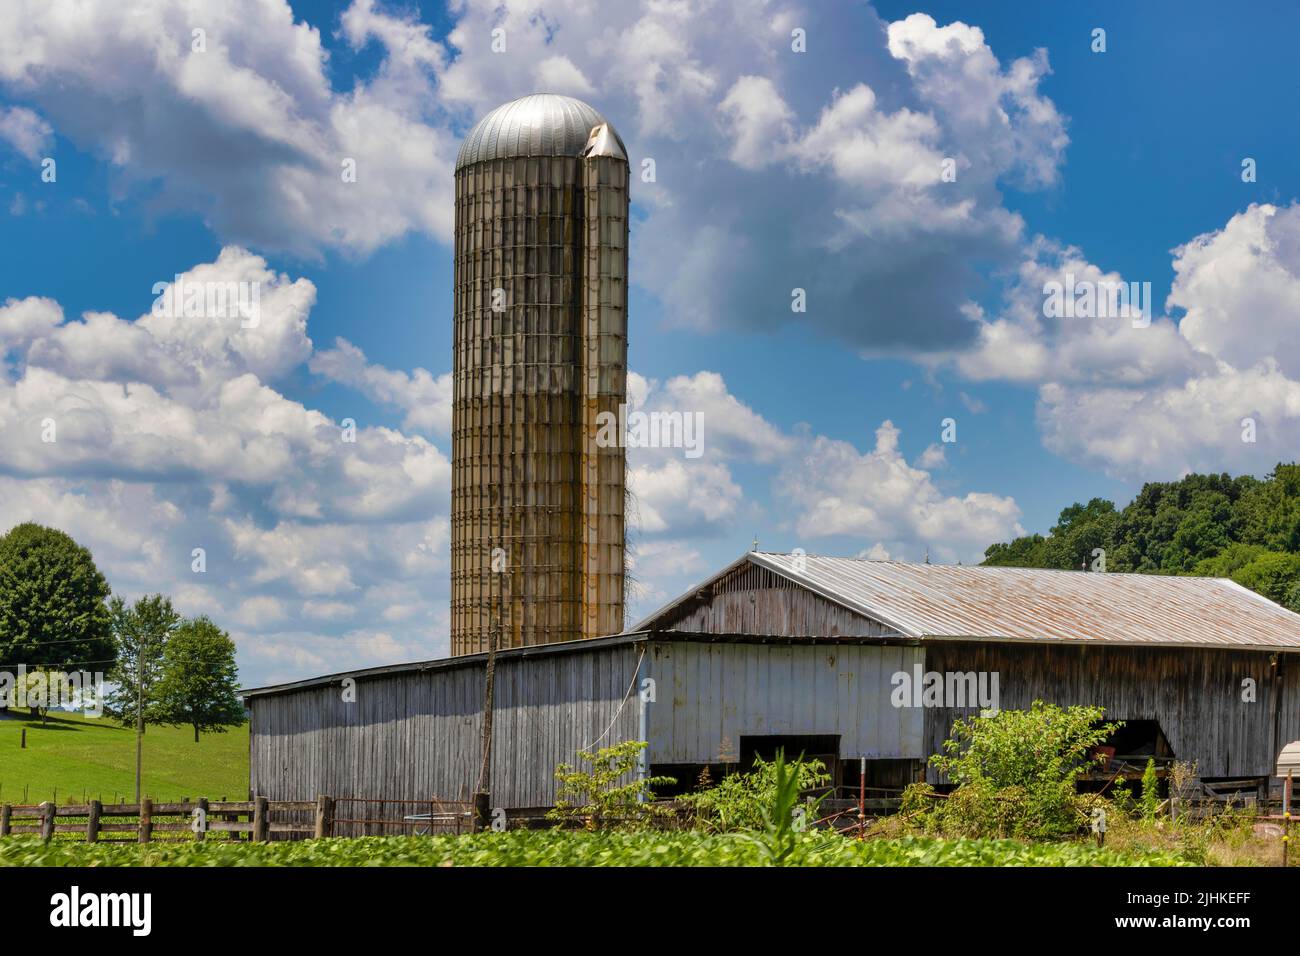 Silo and barn under cloudy skies in the agricultural landscape in rural Tennessee. Stock Photo